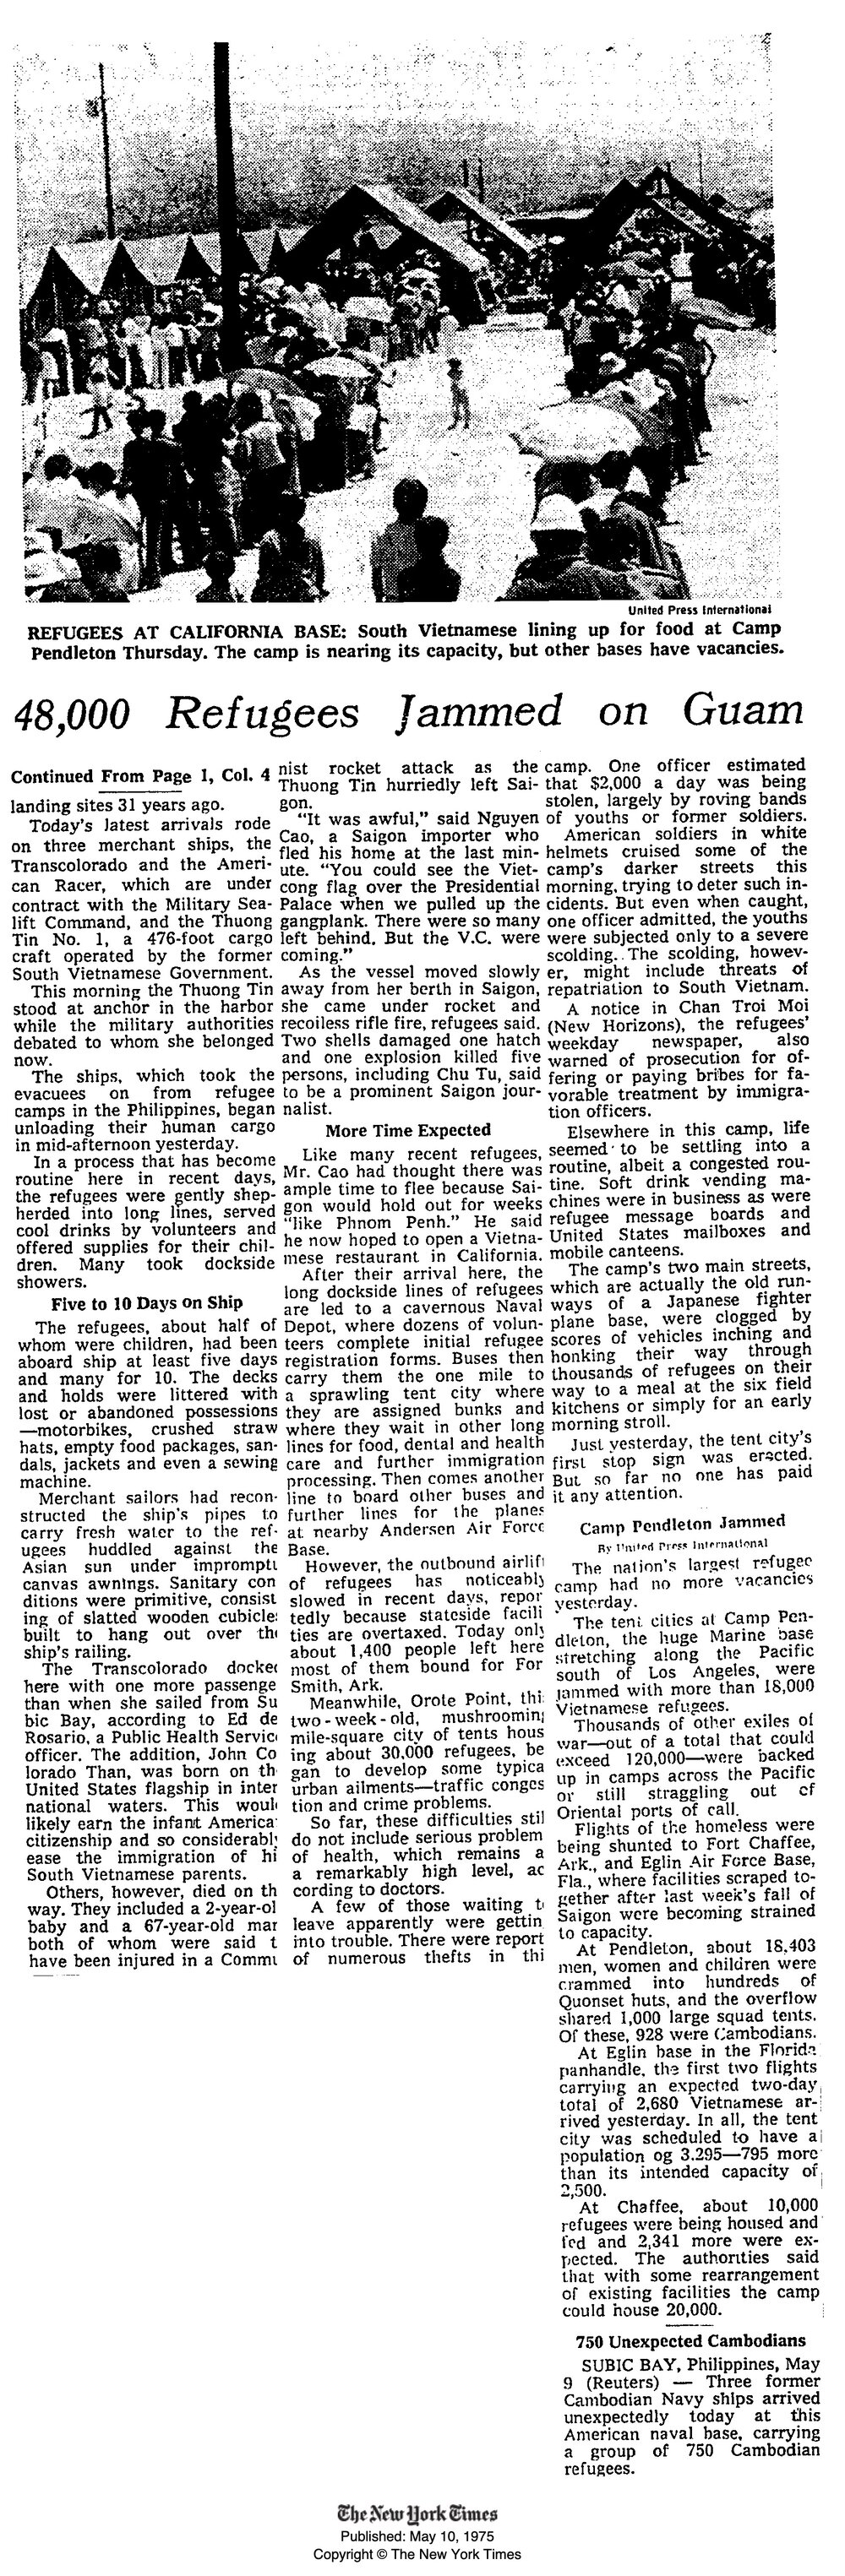 The New York Times_ May 10, 1975_Pg.4